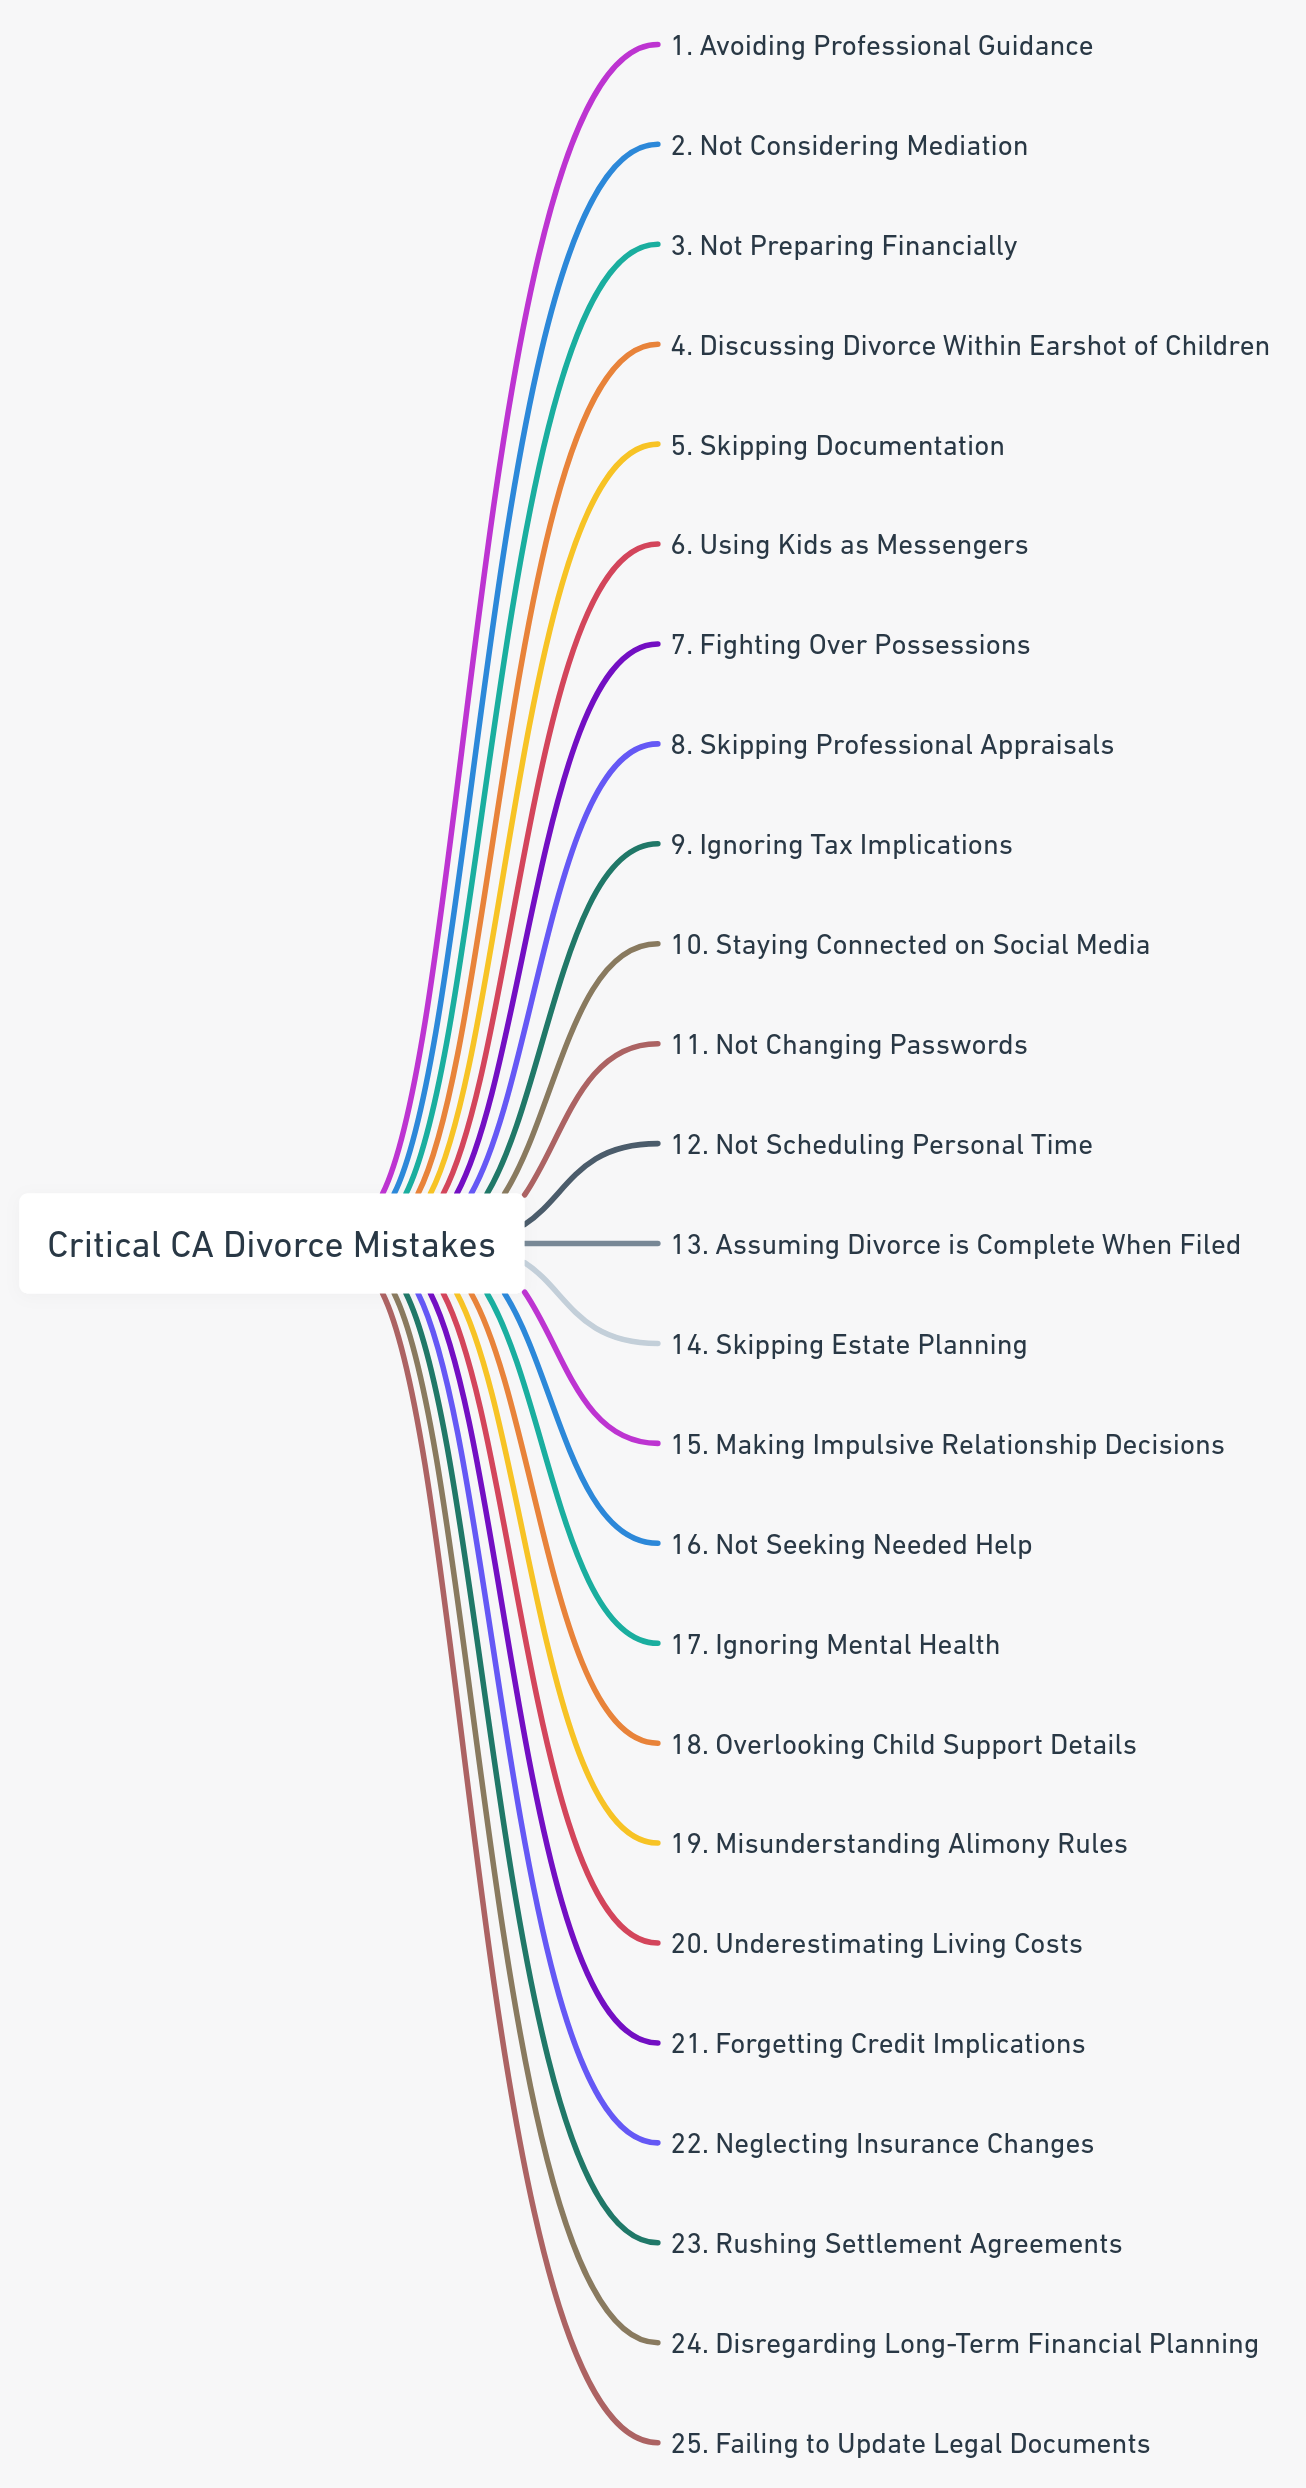 A visual guide highlighting 25 critical mistakes to avoid in a California divorce.